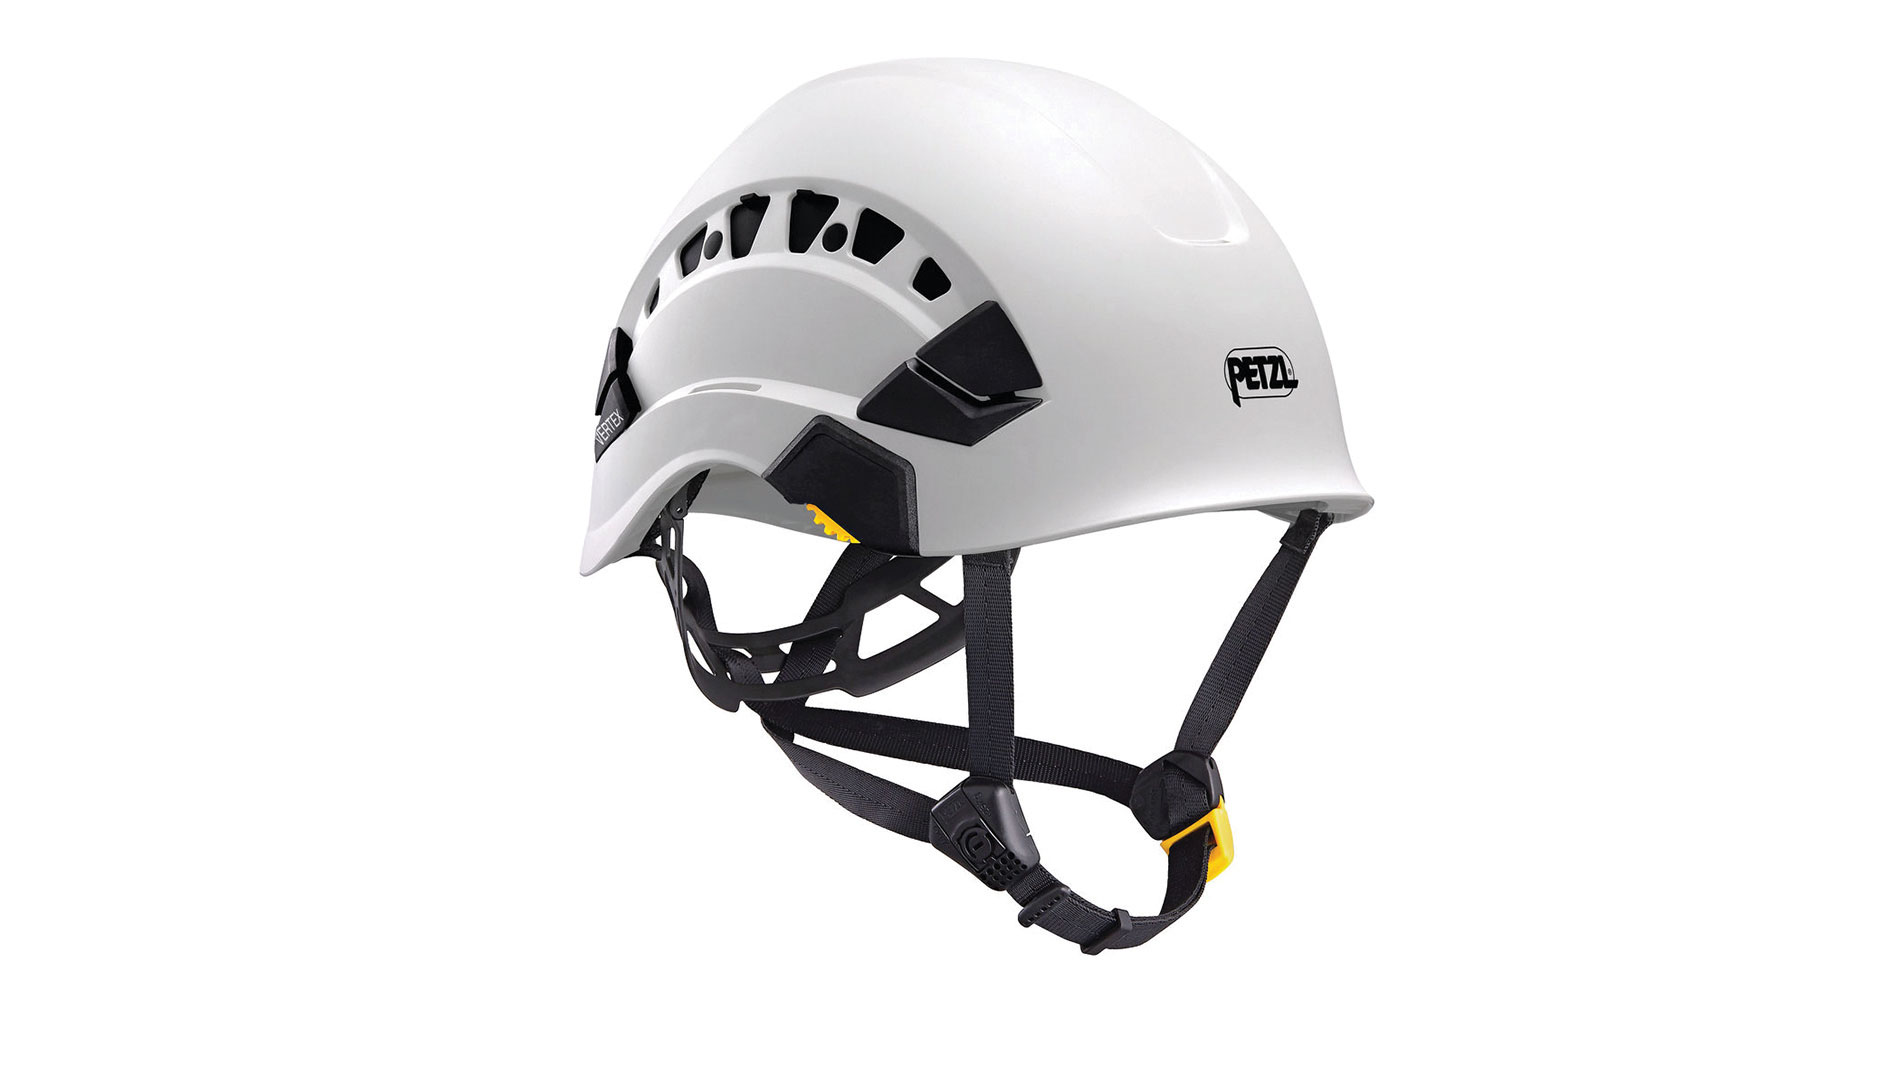 White helmet with black and yellow straps. Image by Petzl.